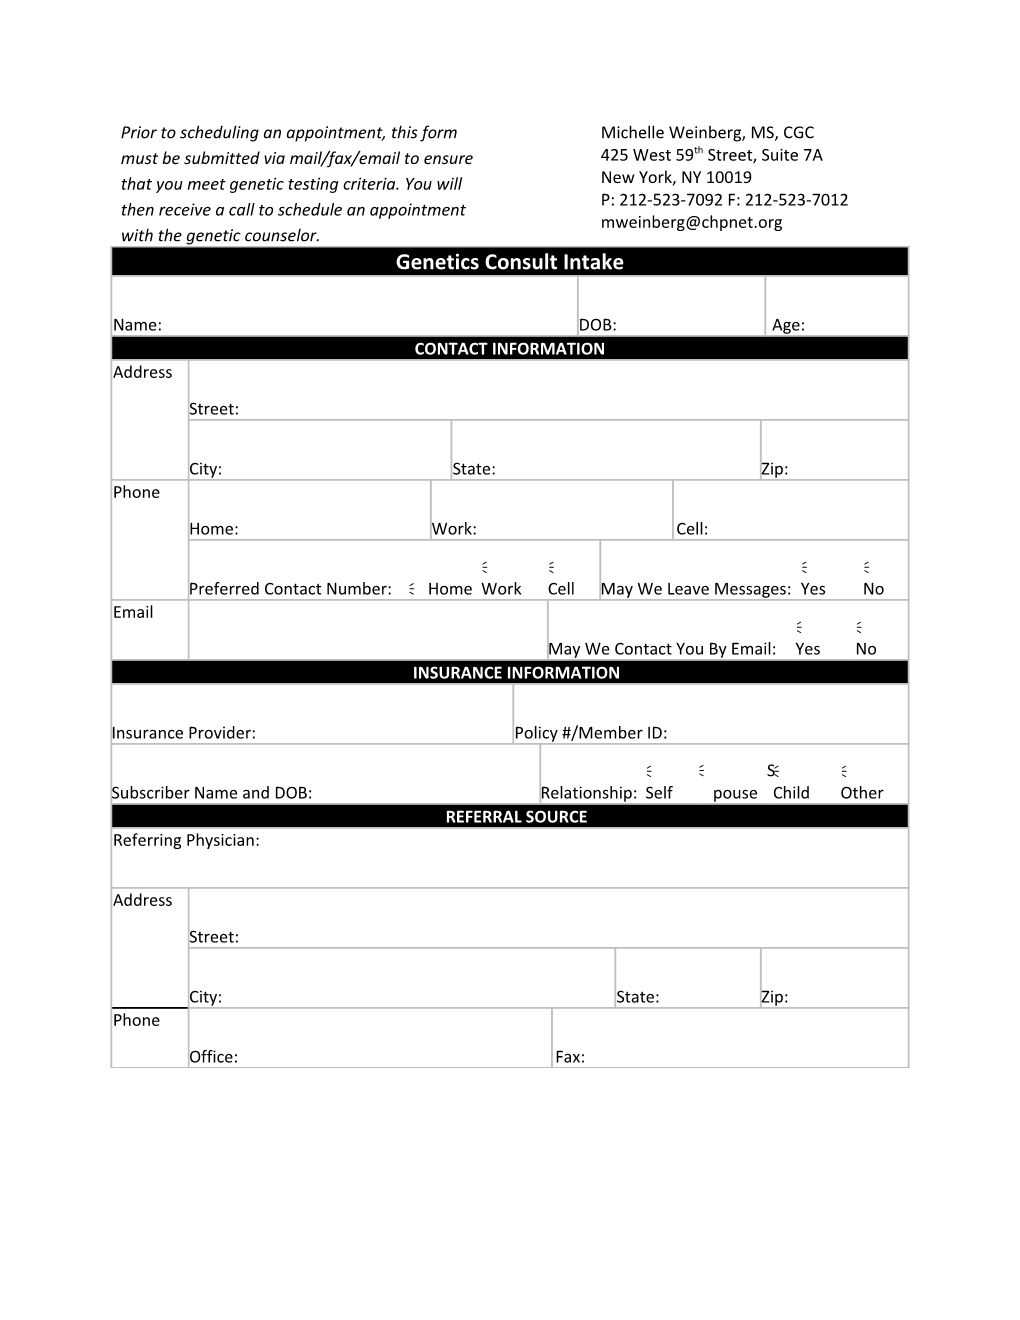 Prior to Scheduling an Appointment, This Form Must Be Submitted Via Mail/Fax/Email To